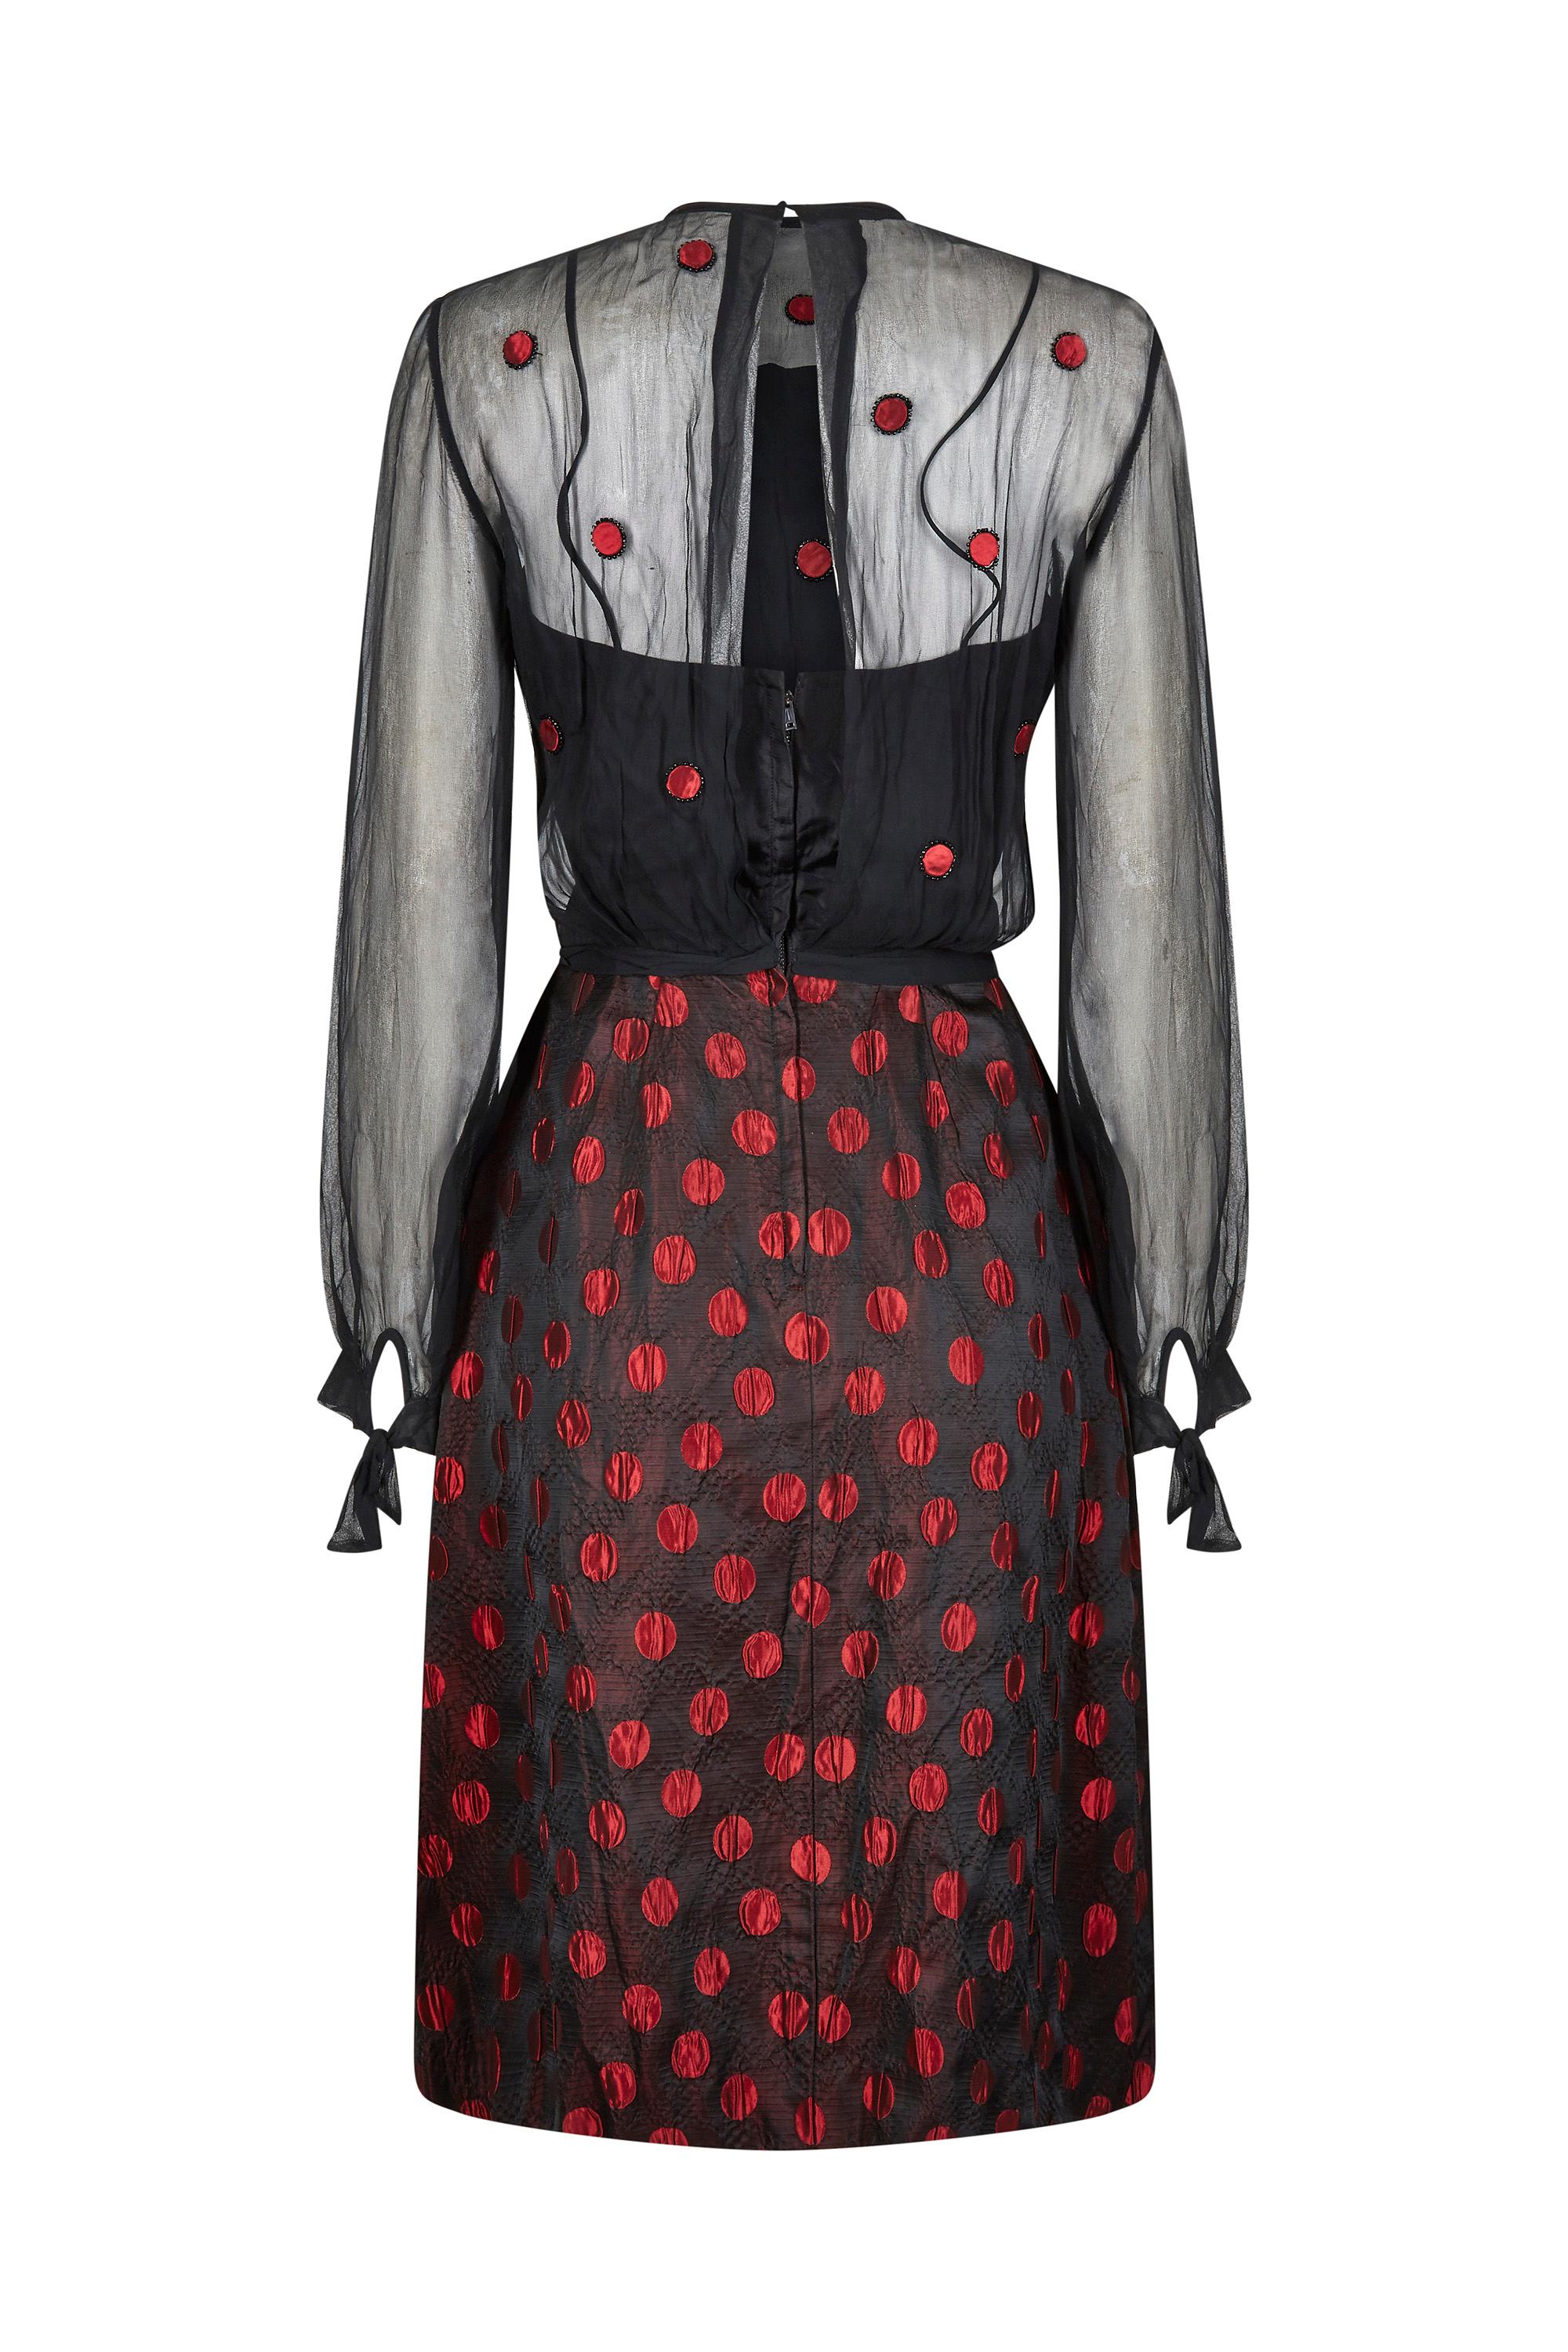 1960s Black and Red Polka Dot Demi Couture Dress and Jacket In Excellent Condition For Sale In London, GB